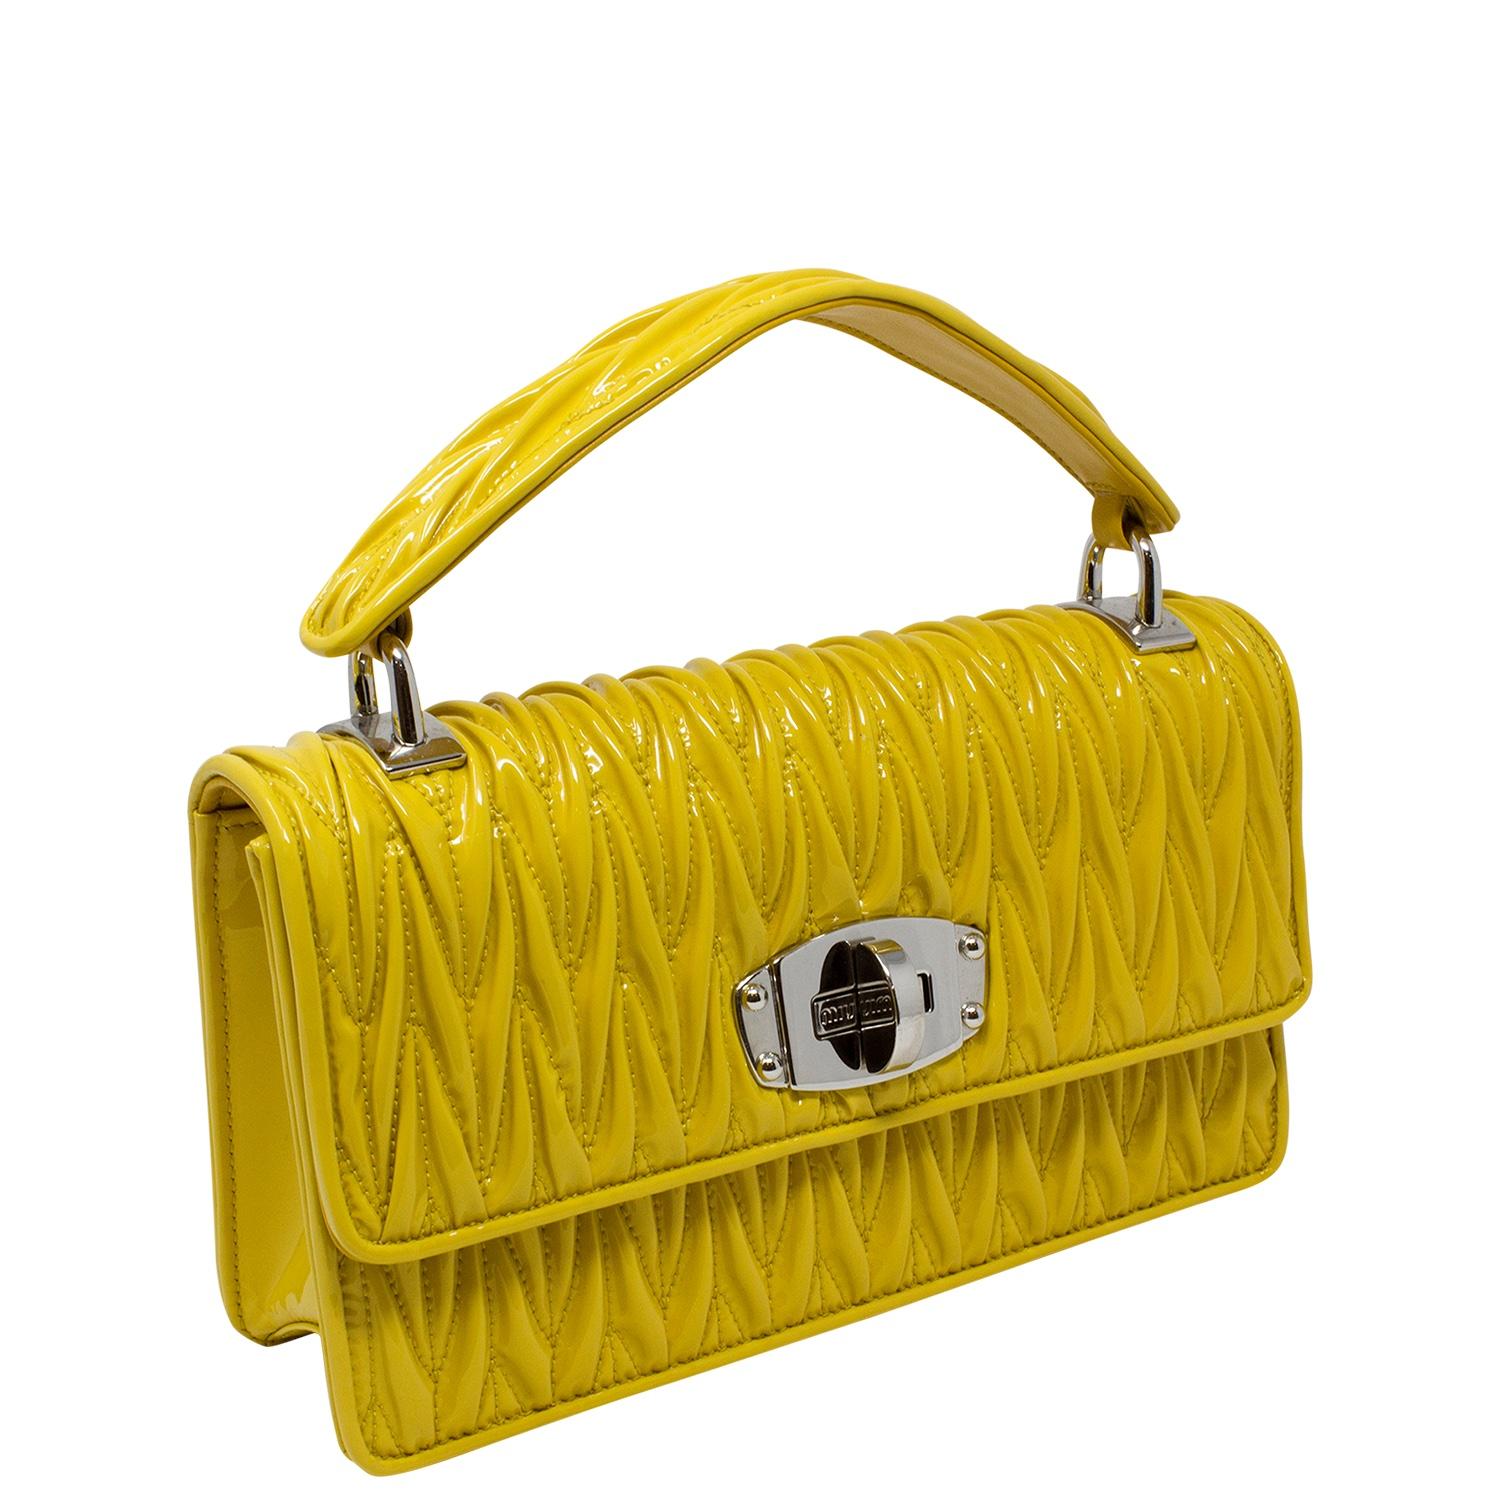 De Cru favorite! Stunning yellow chevron quilting over gorgeous patent. We love the versatility of the top handle and the removable crossbody strap. The foldover flap opens up with a twist-lock closure. The silver-tone hardware is perfect with the